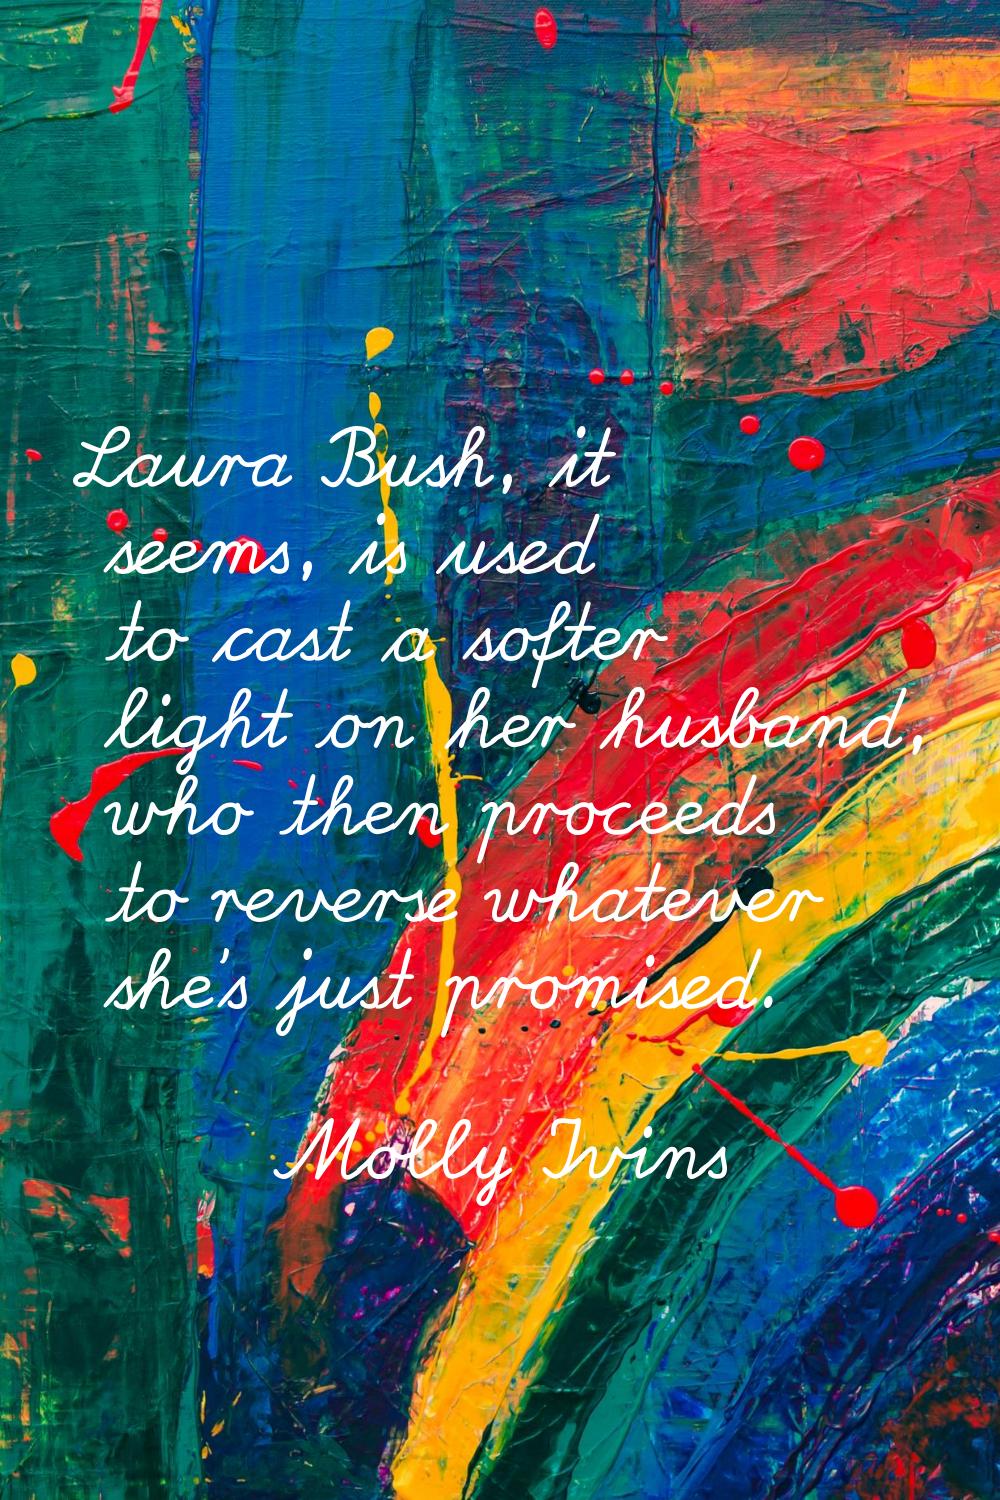 Laura Bush, it seems, is used to cast a softer light on her husband, who then proceeds to reverse w